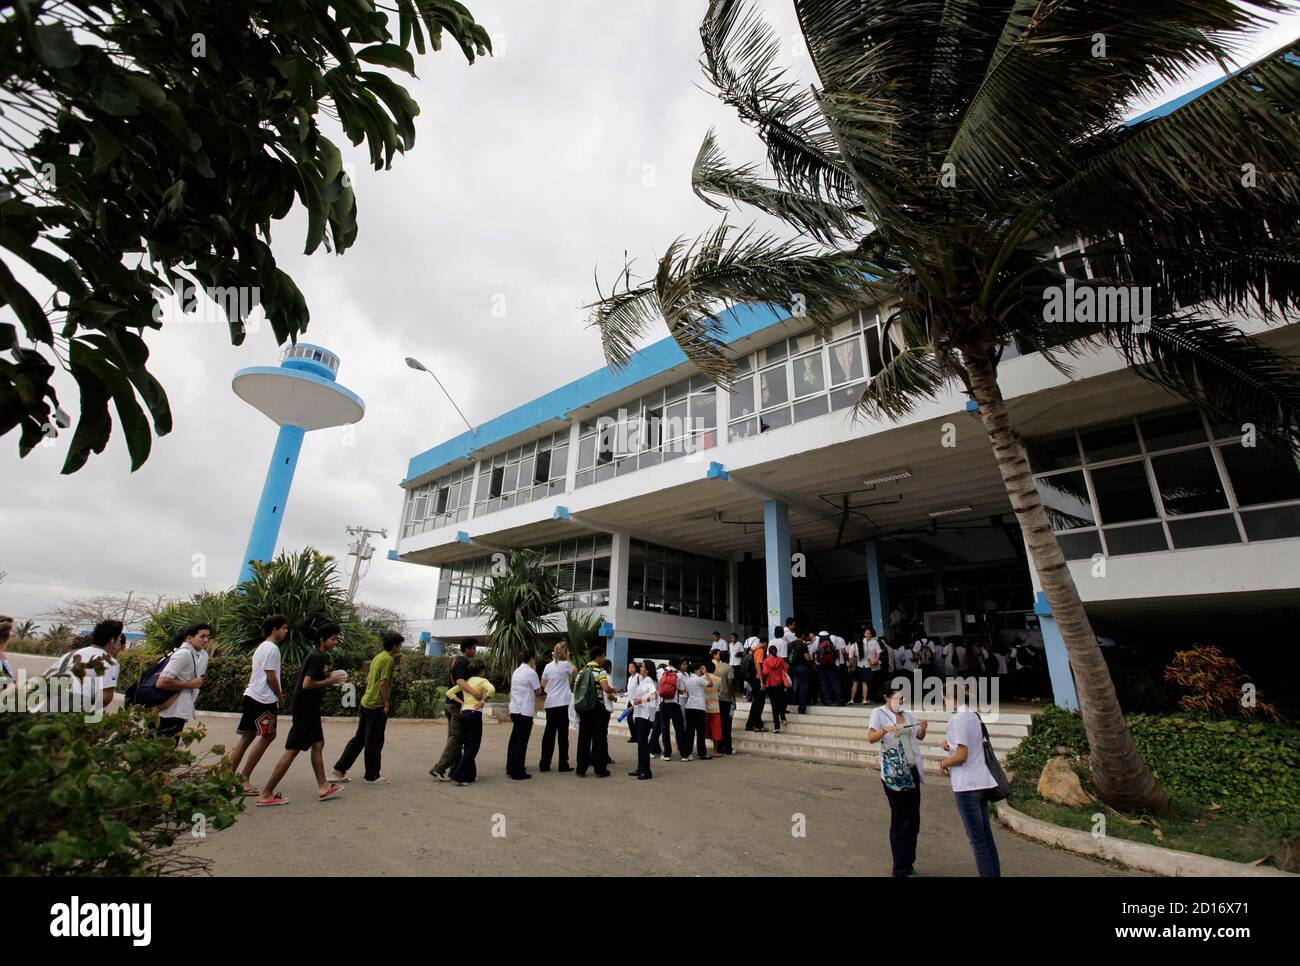 Medical students of Cuba's ELAM (Latin American School of Medicine) line up for at the campus on the outskirts of Havana March 11, 2010. Established 1999 by former Cuban